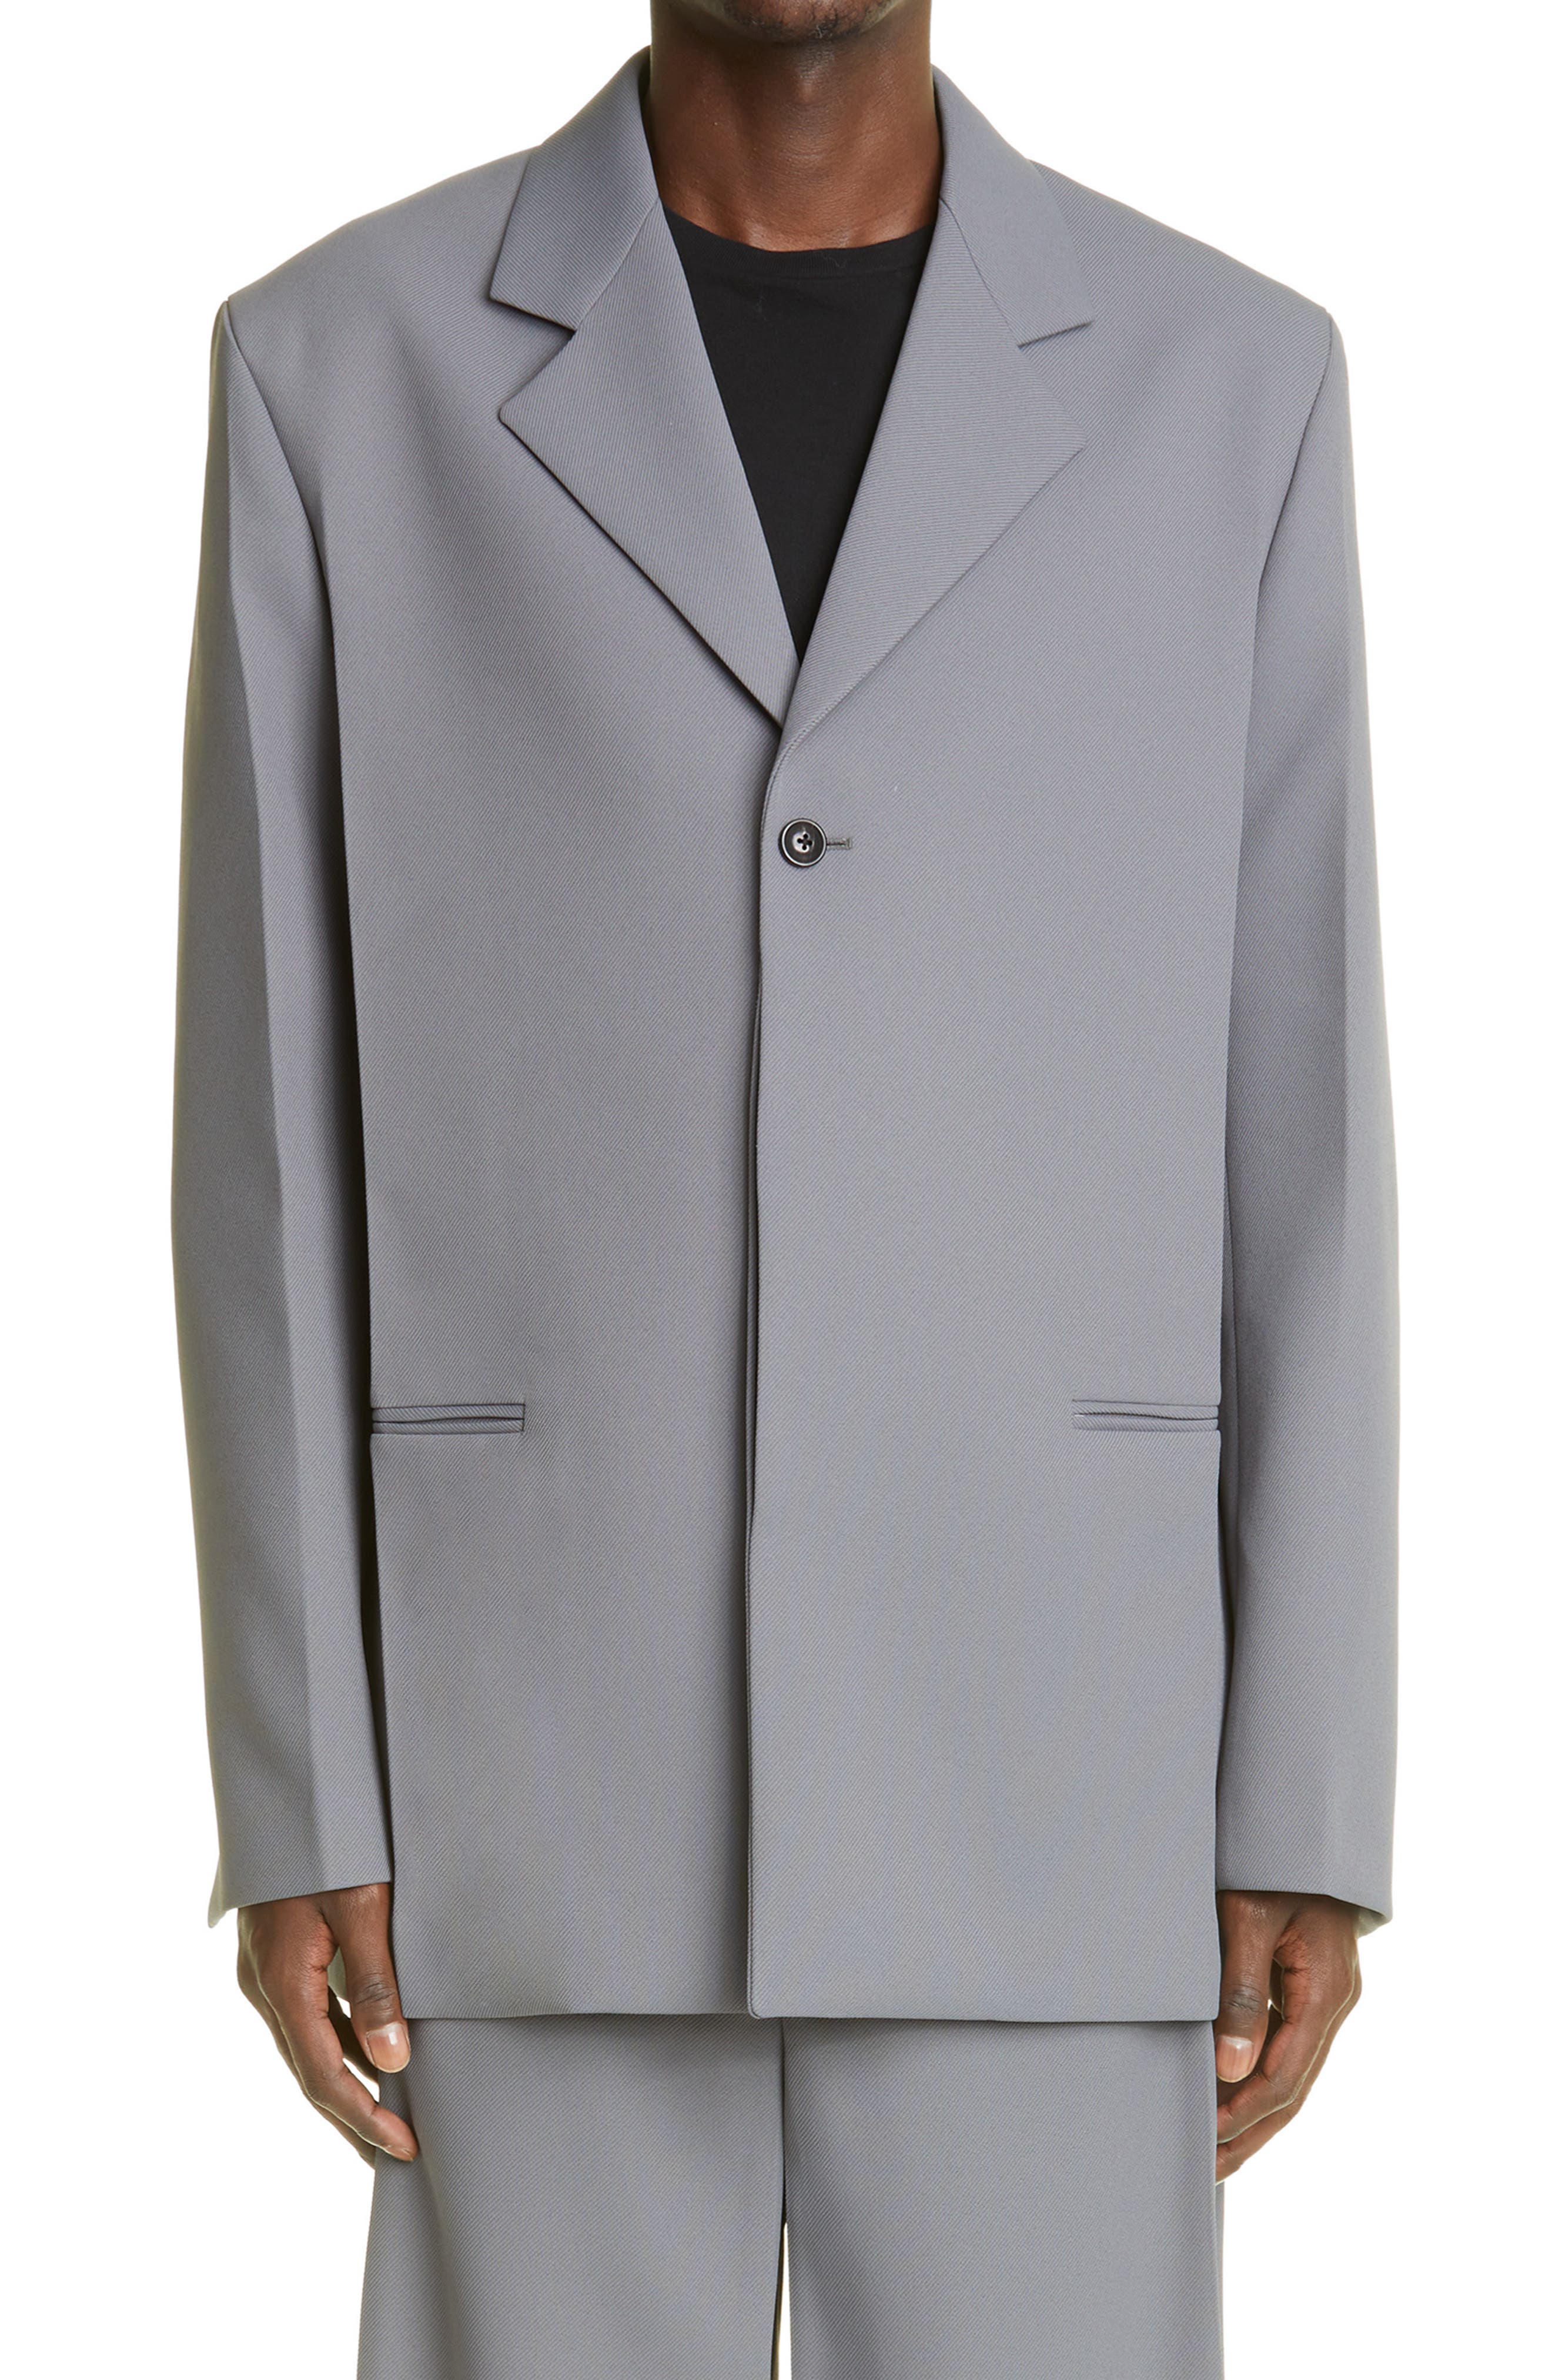 Off-White Crease Single Button Jacket in Castlerock at Nordstrom, Size 40 Us